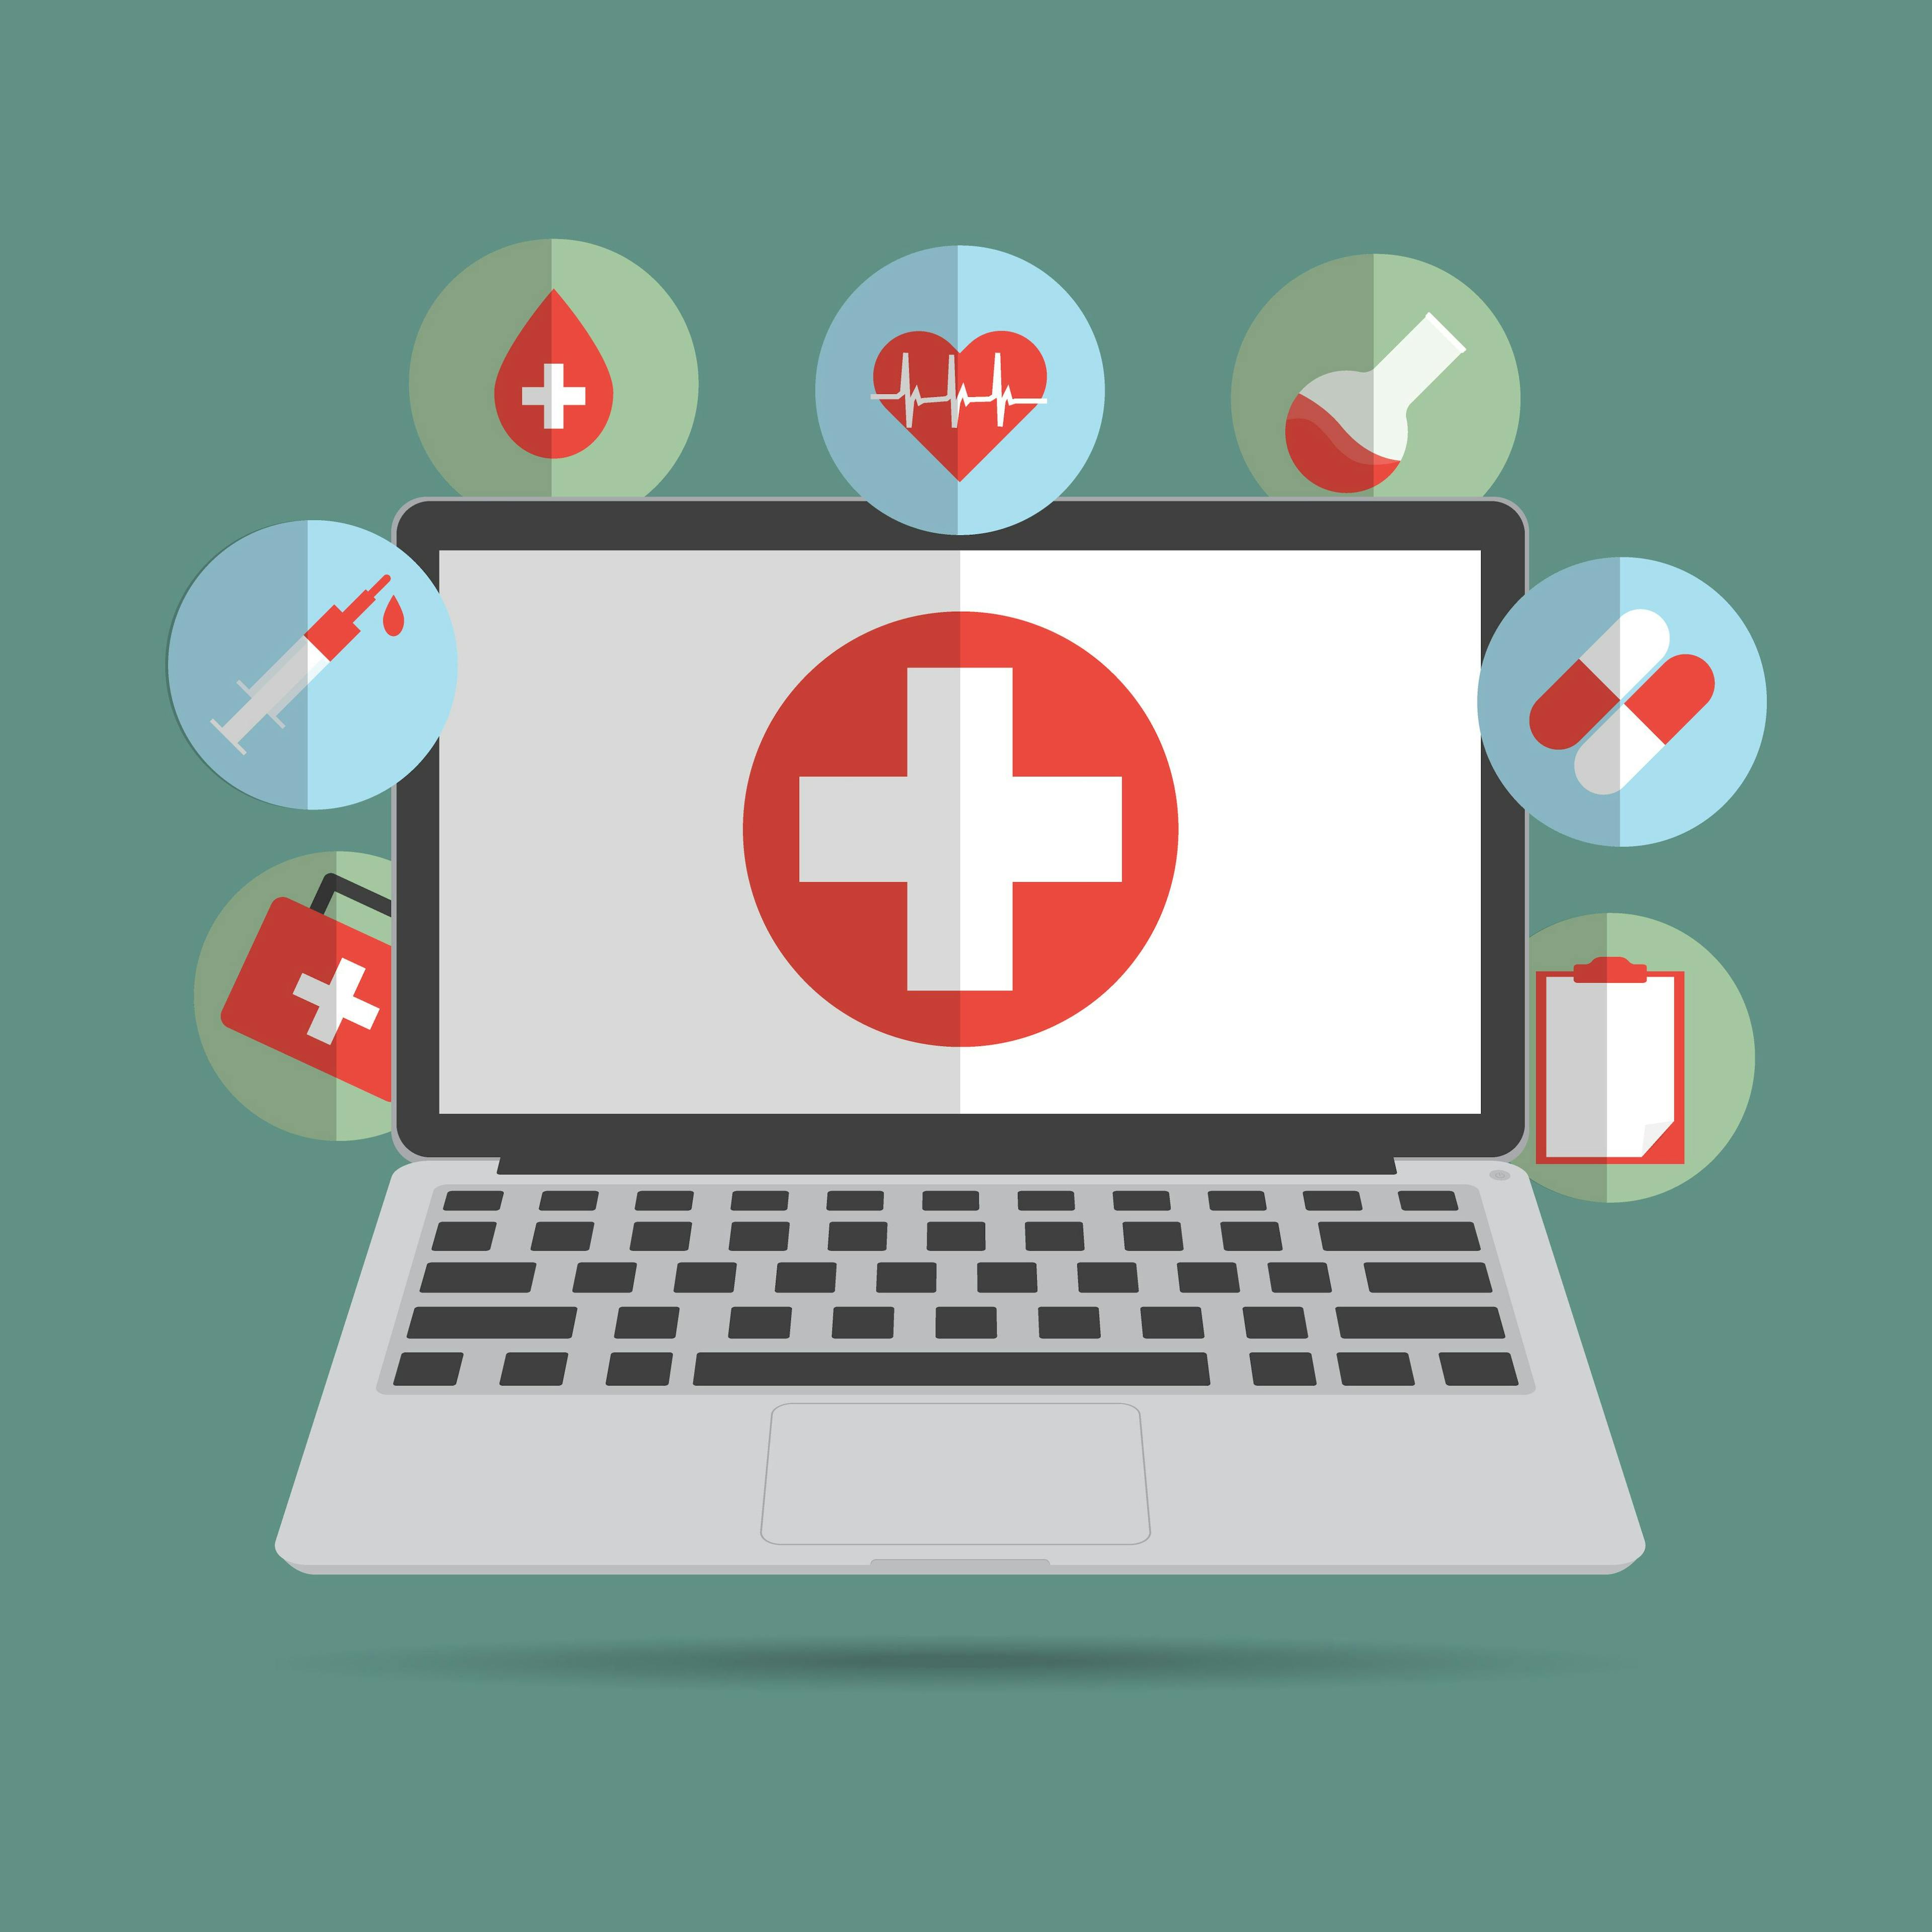 How to keep getting paid for telehealth in 2021